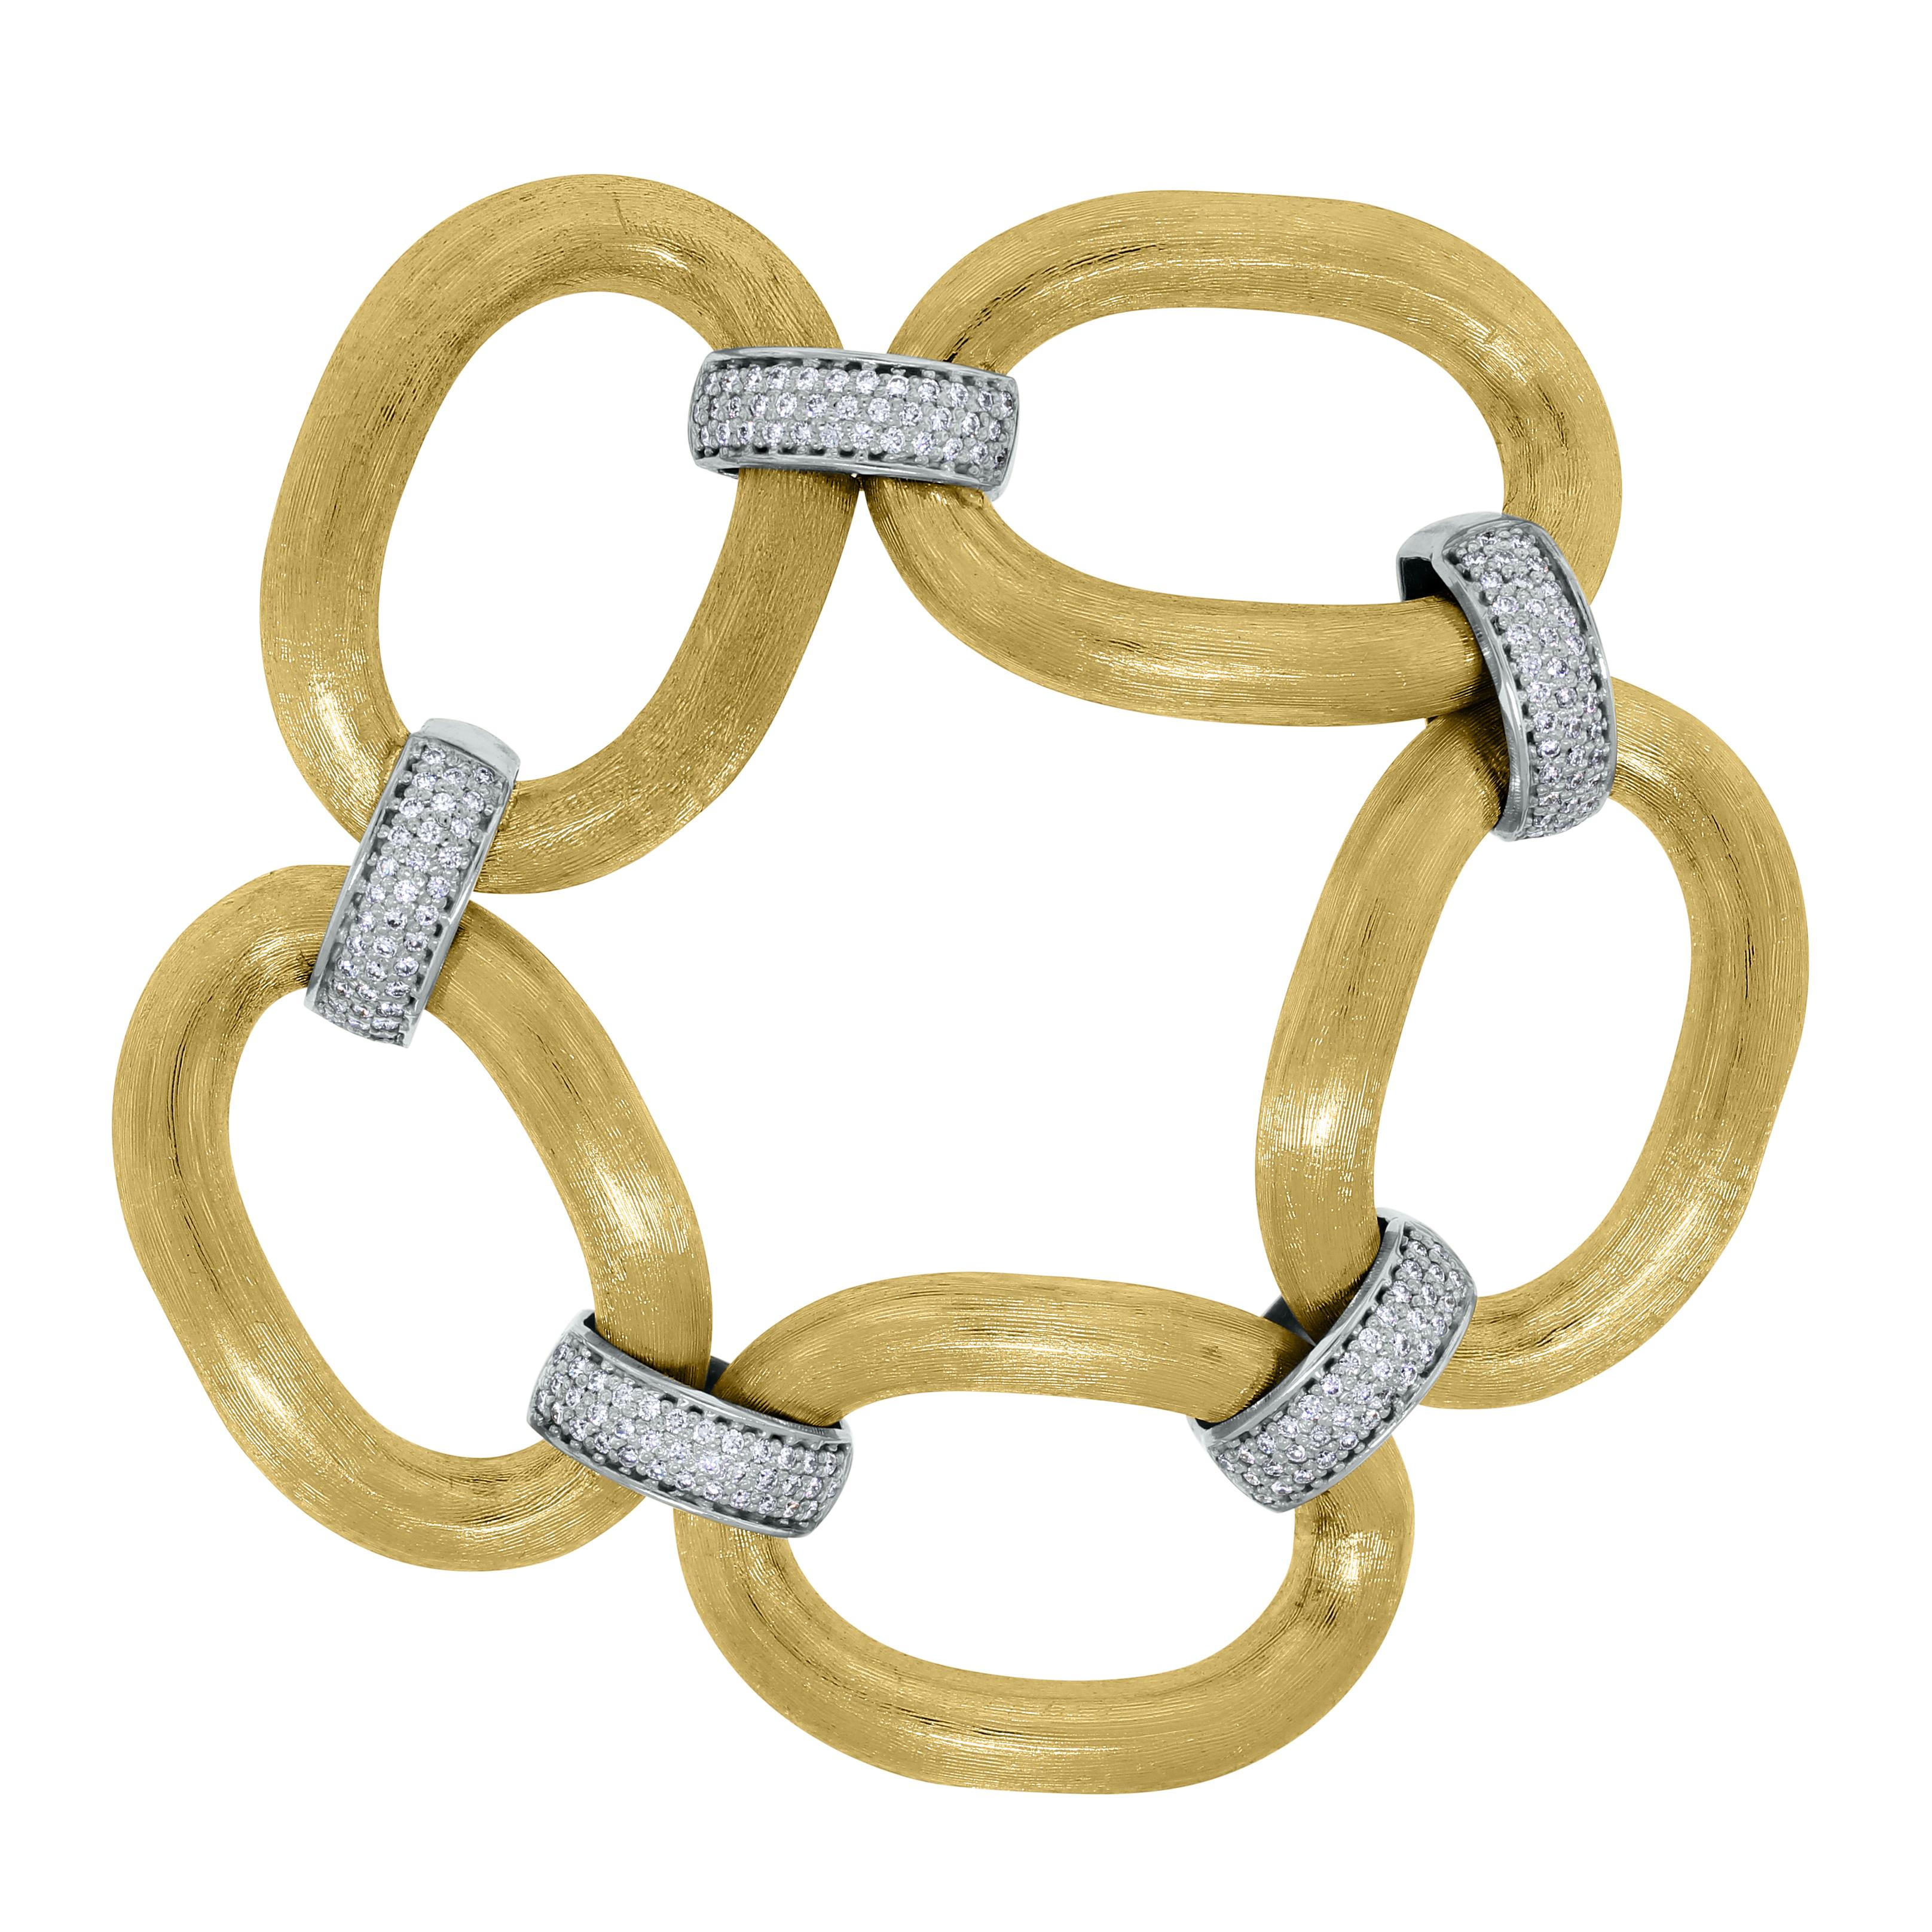 Large satin finished gold links give this bracelet a bold character while the mini diamond links contrast and accentuate its beauty making it an ideal piece of jewelry for occasional or everyday statement wear.

Diamonds Shape: Round 
Total Diamond